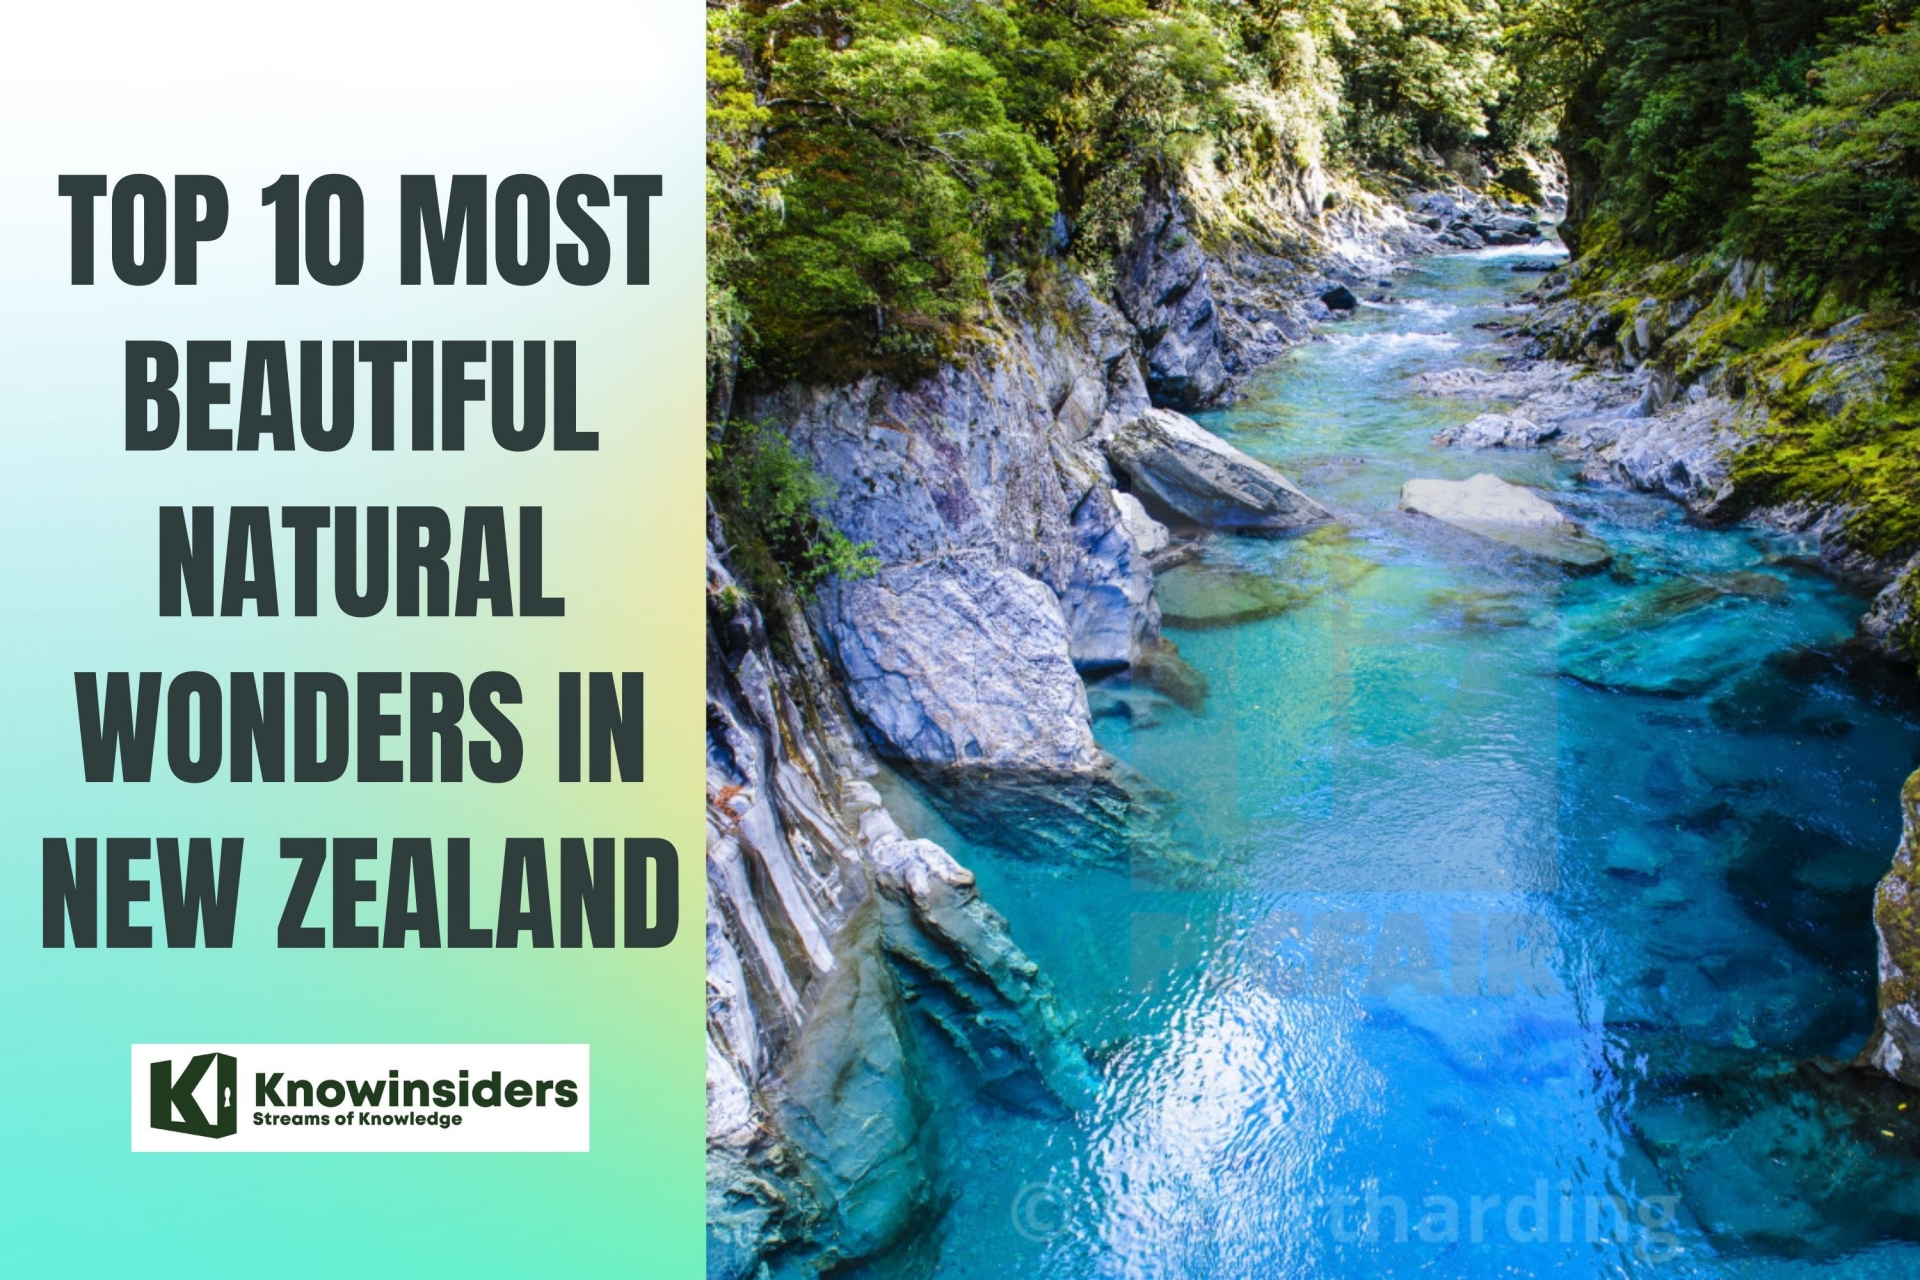 Top 10 Most Beautiful Natural Wonders in New Zealand